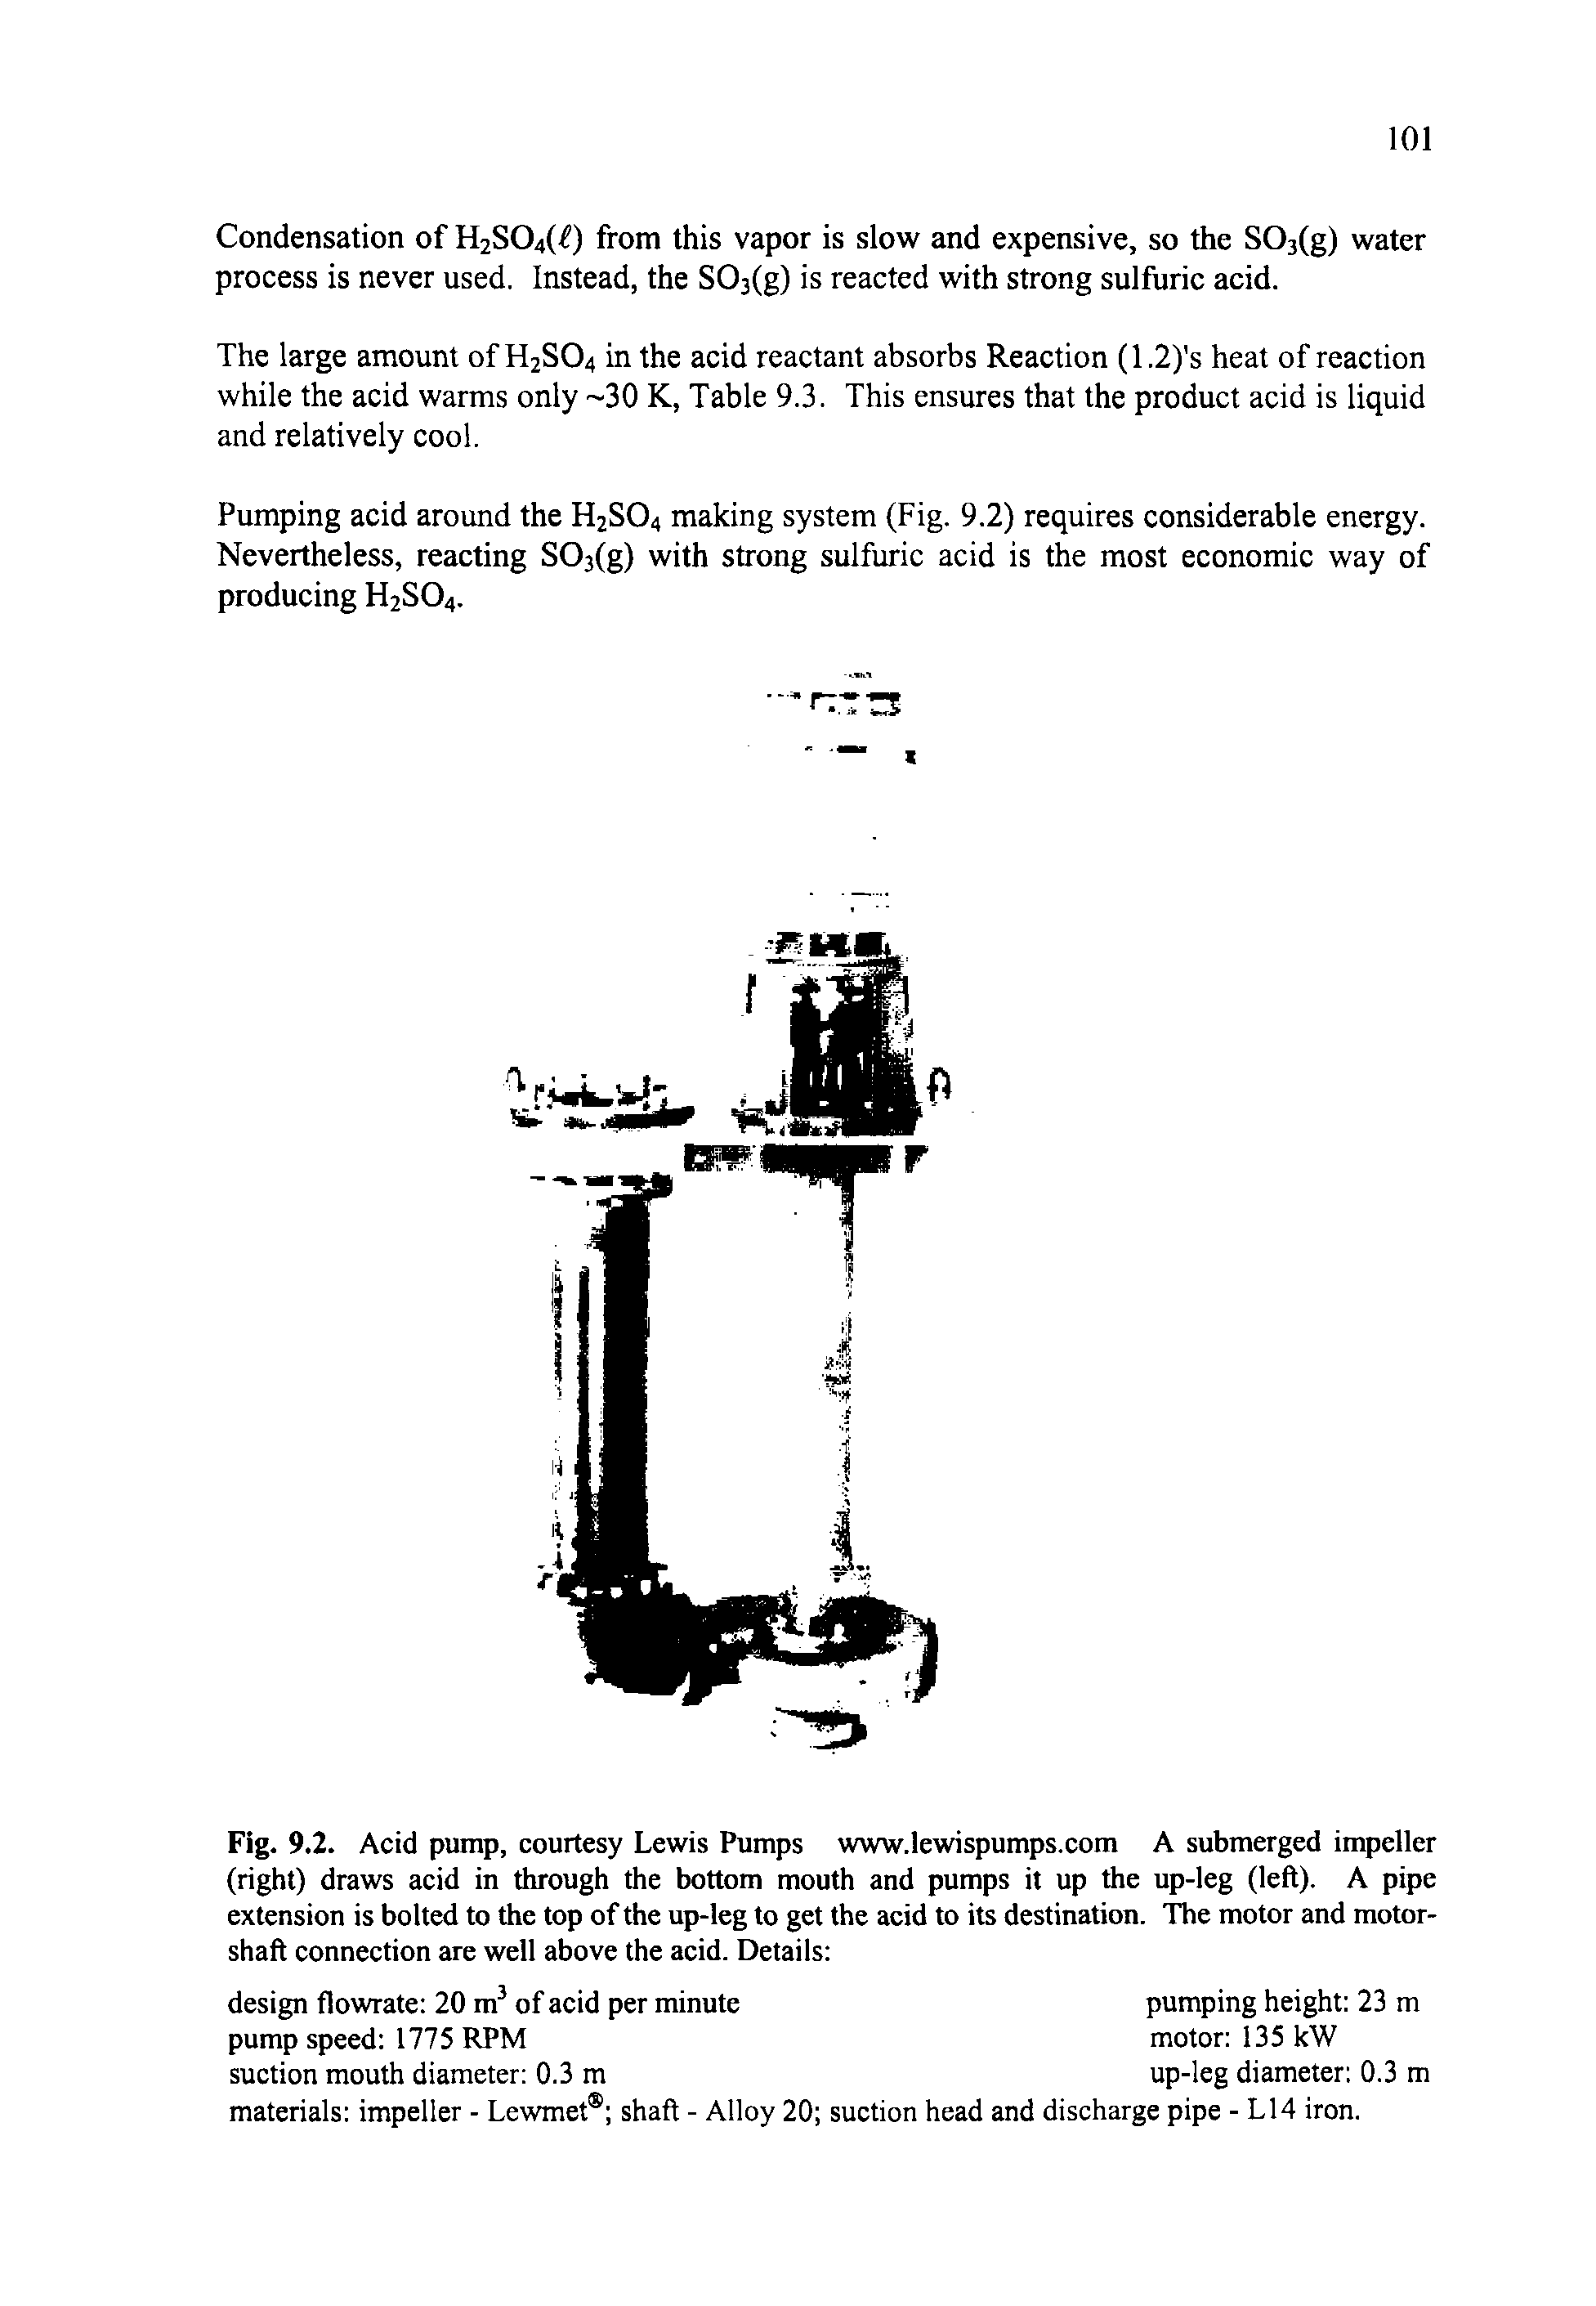 Fig. 9.2. Acid pump, courtesy Lewis Pumps www.lewispumps.com A submerged impeller (right) draws acid in through the bottom mouth and pumps it up the up-leg (left). A pipe extension is bolted to the top of the up-leg to get the acid to its destination. The motor and motor-shaft connection are well above the acid. Details ...